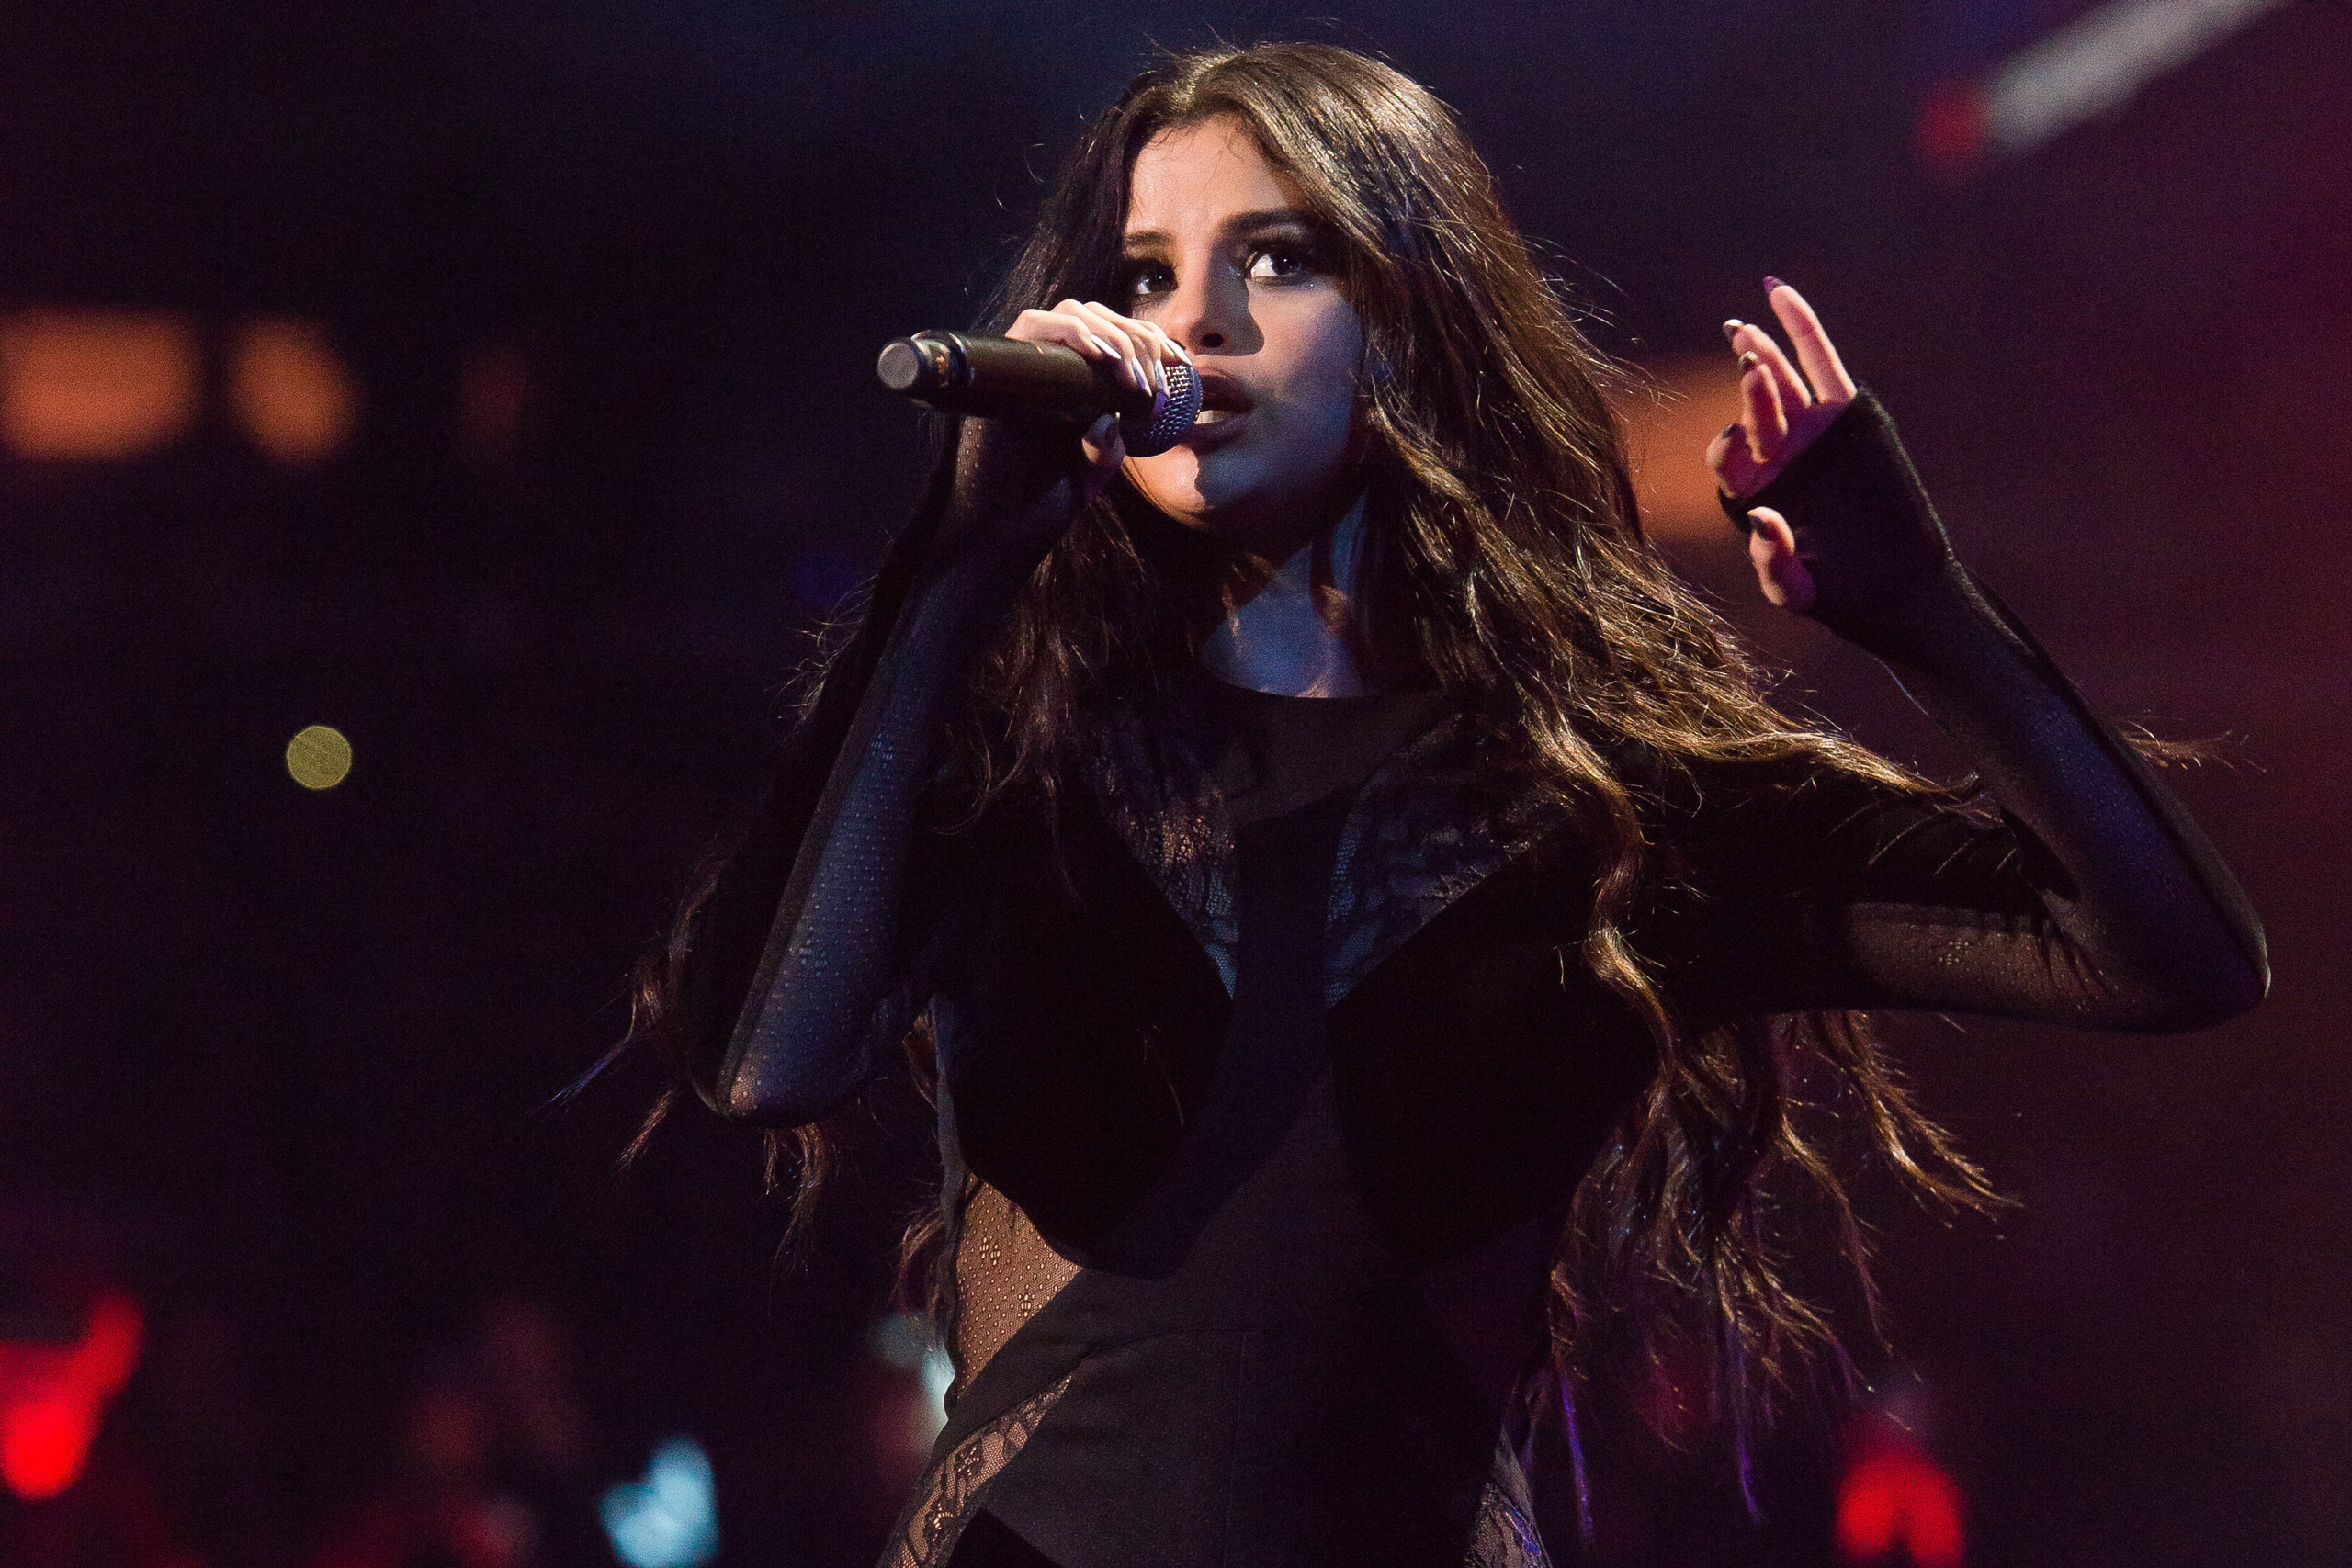 Selena Gomez performs at Z100's iHeartRadio Jingle Ball 2015 at Madison Square Garden in New York on Dec. 11, 2015. (Charles Sykes—Invision/AP)